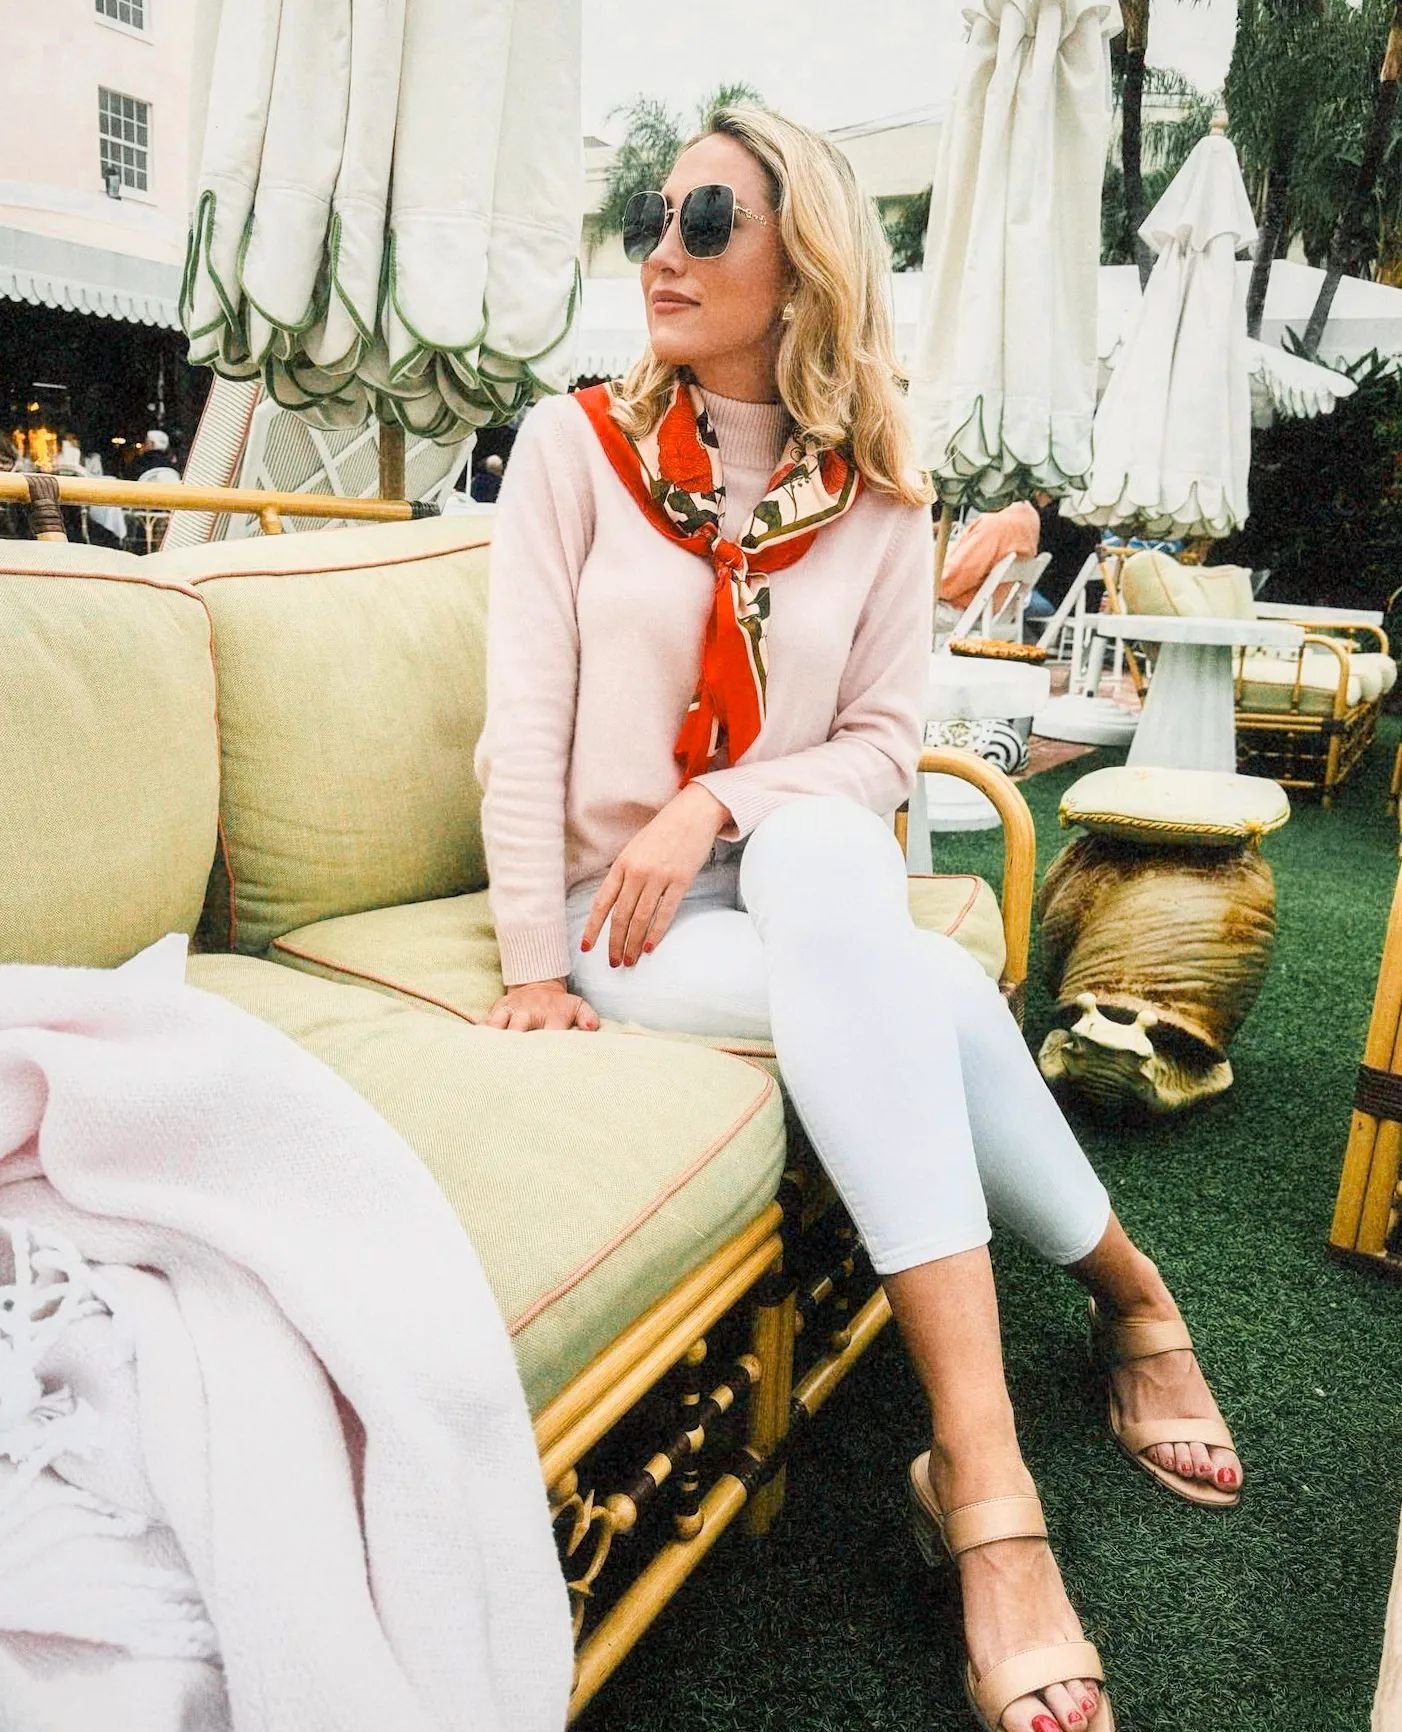 Leisure in style. Couldn't have styled our Whimsical Garden scarf better than @kelseytrundle did.